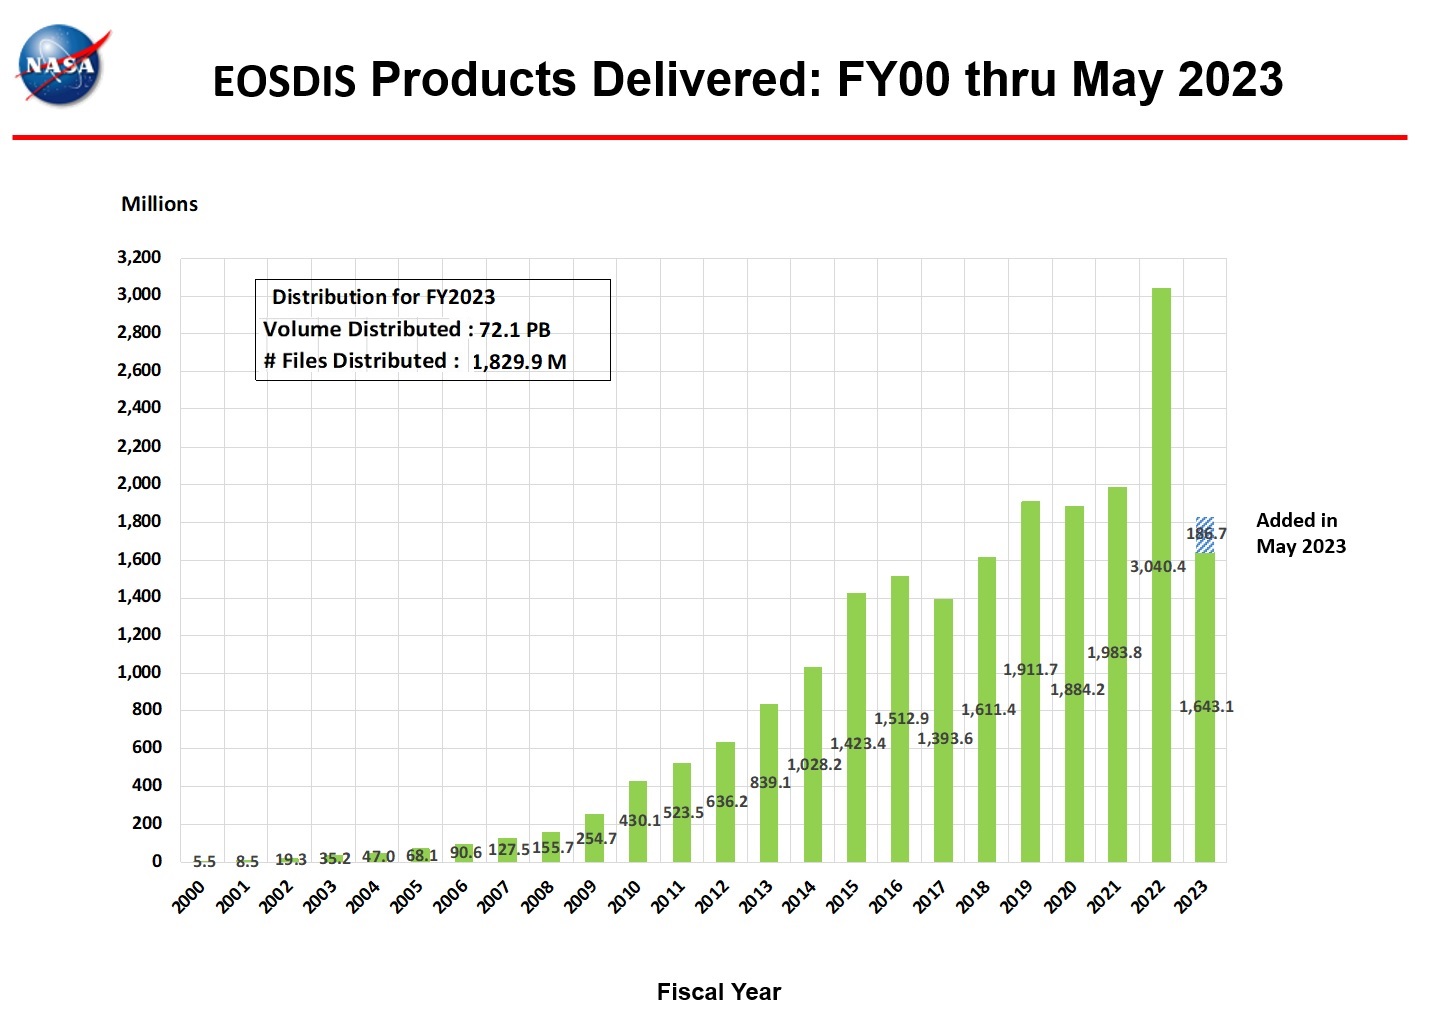 eosdis products delivered 5-2023